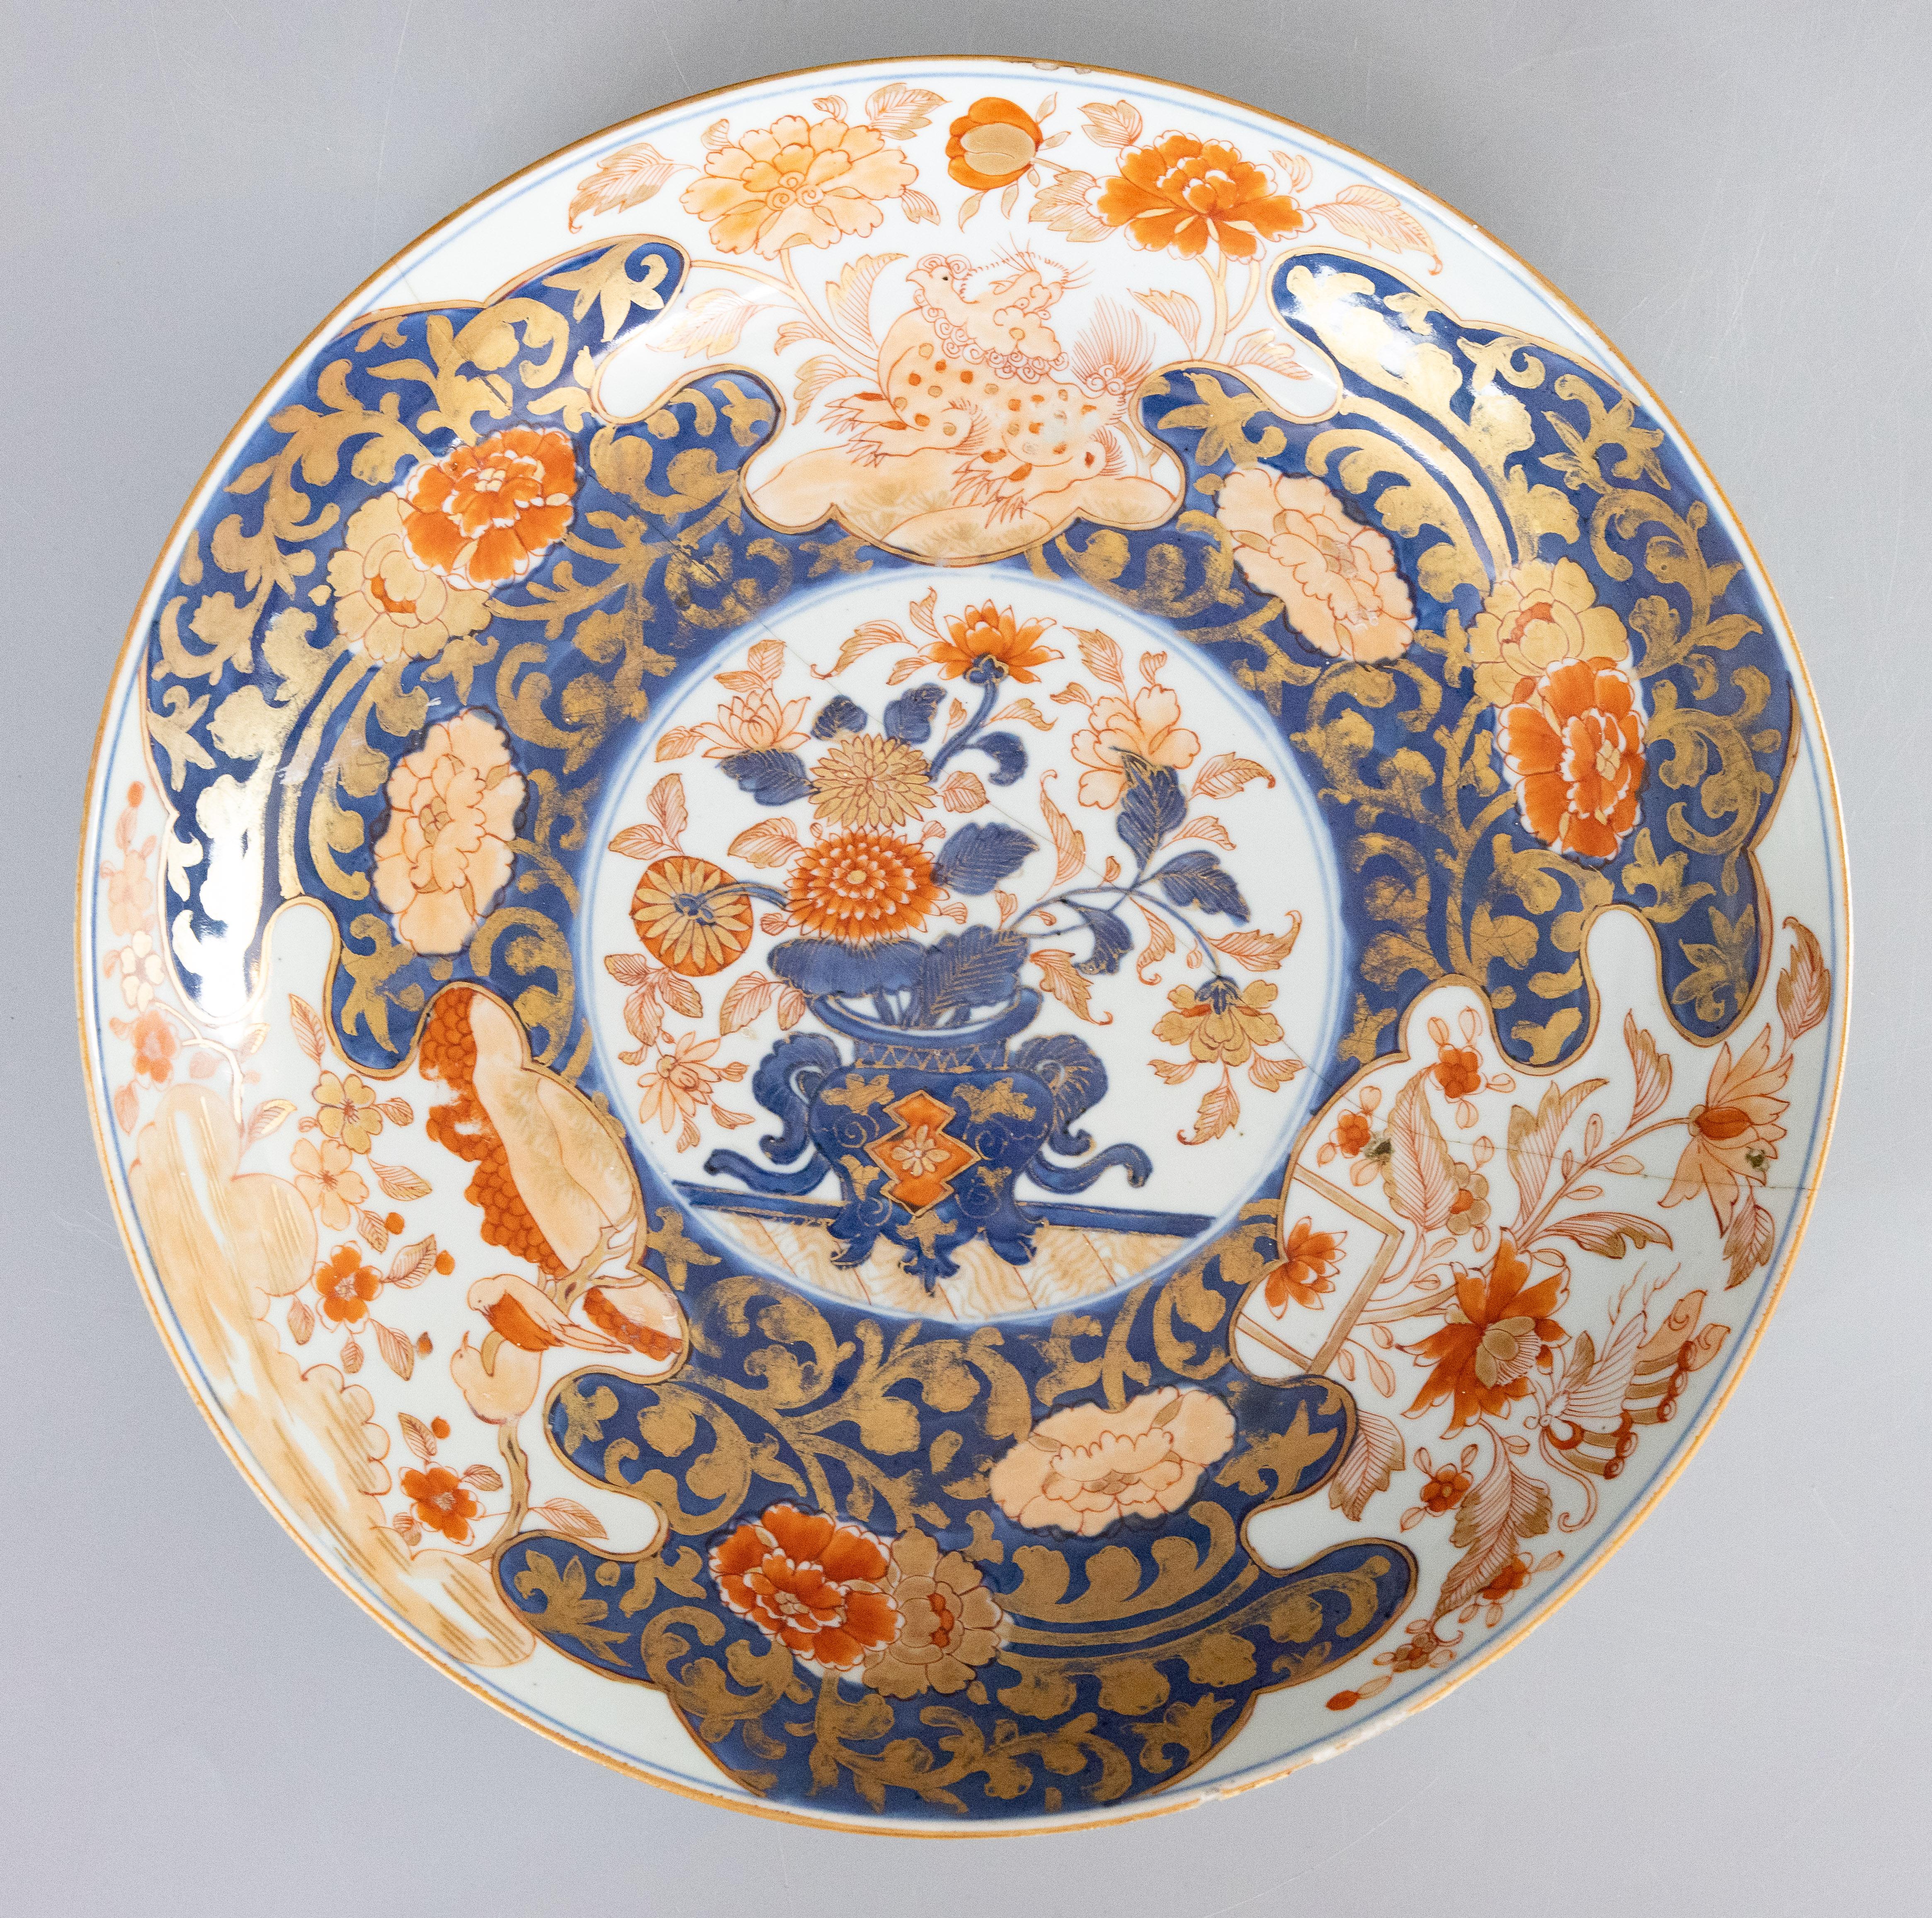 Antique 19th Century Imari Staple Charger In Good Condition For Sale In Pearland, TX